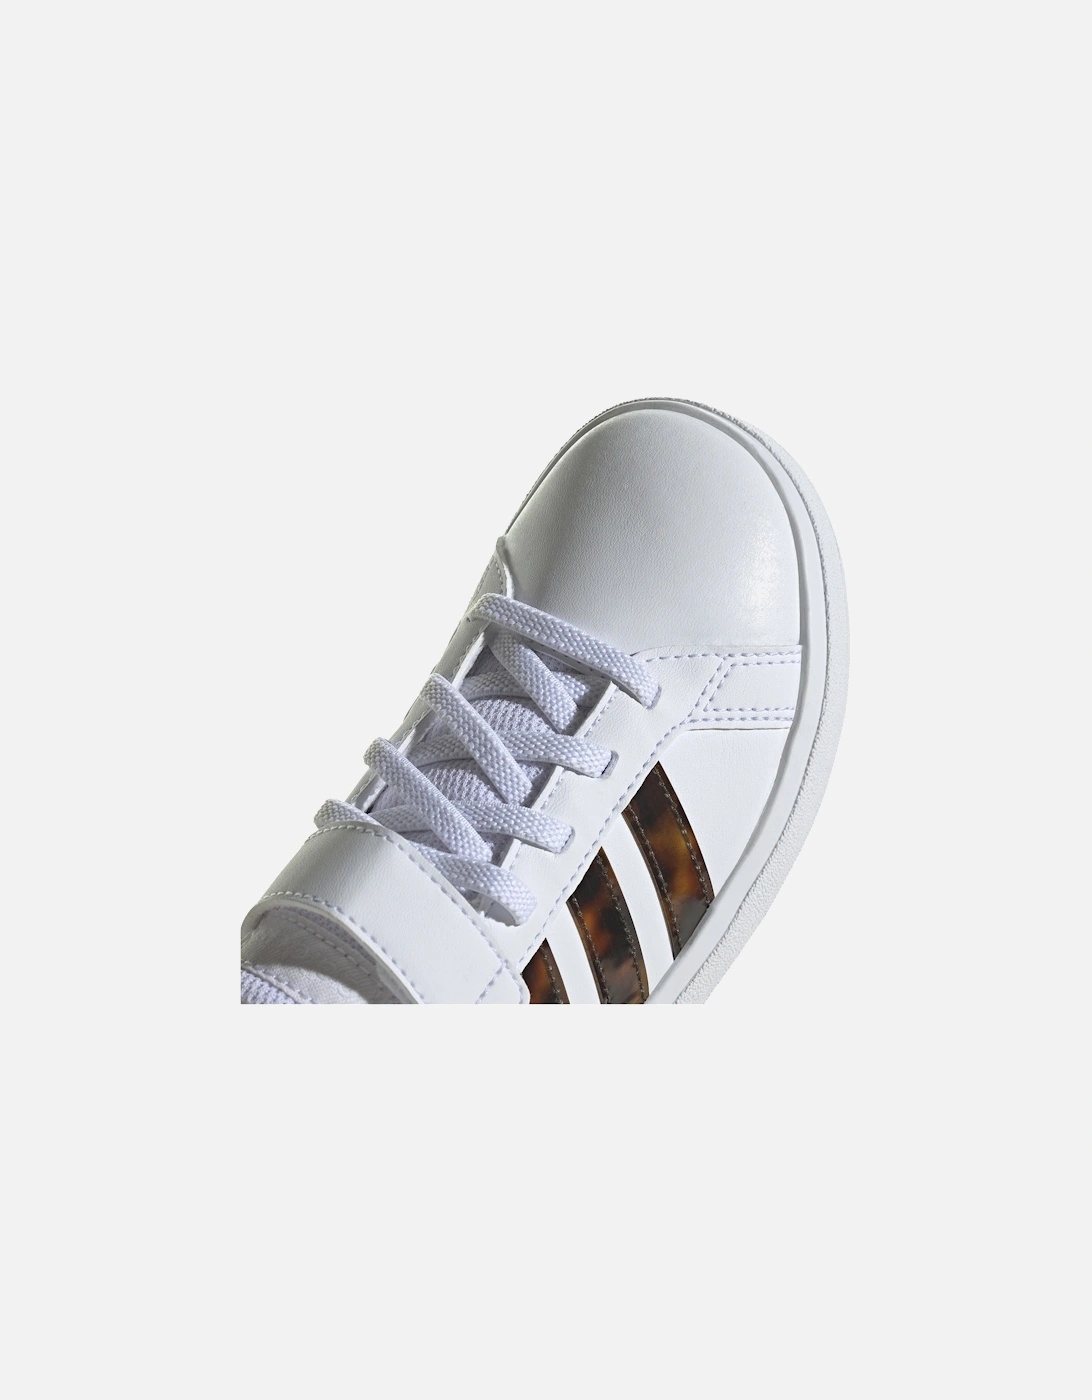 Youths Grand Trainers (White)